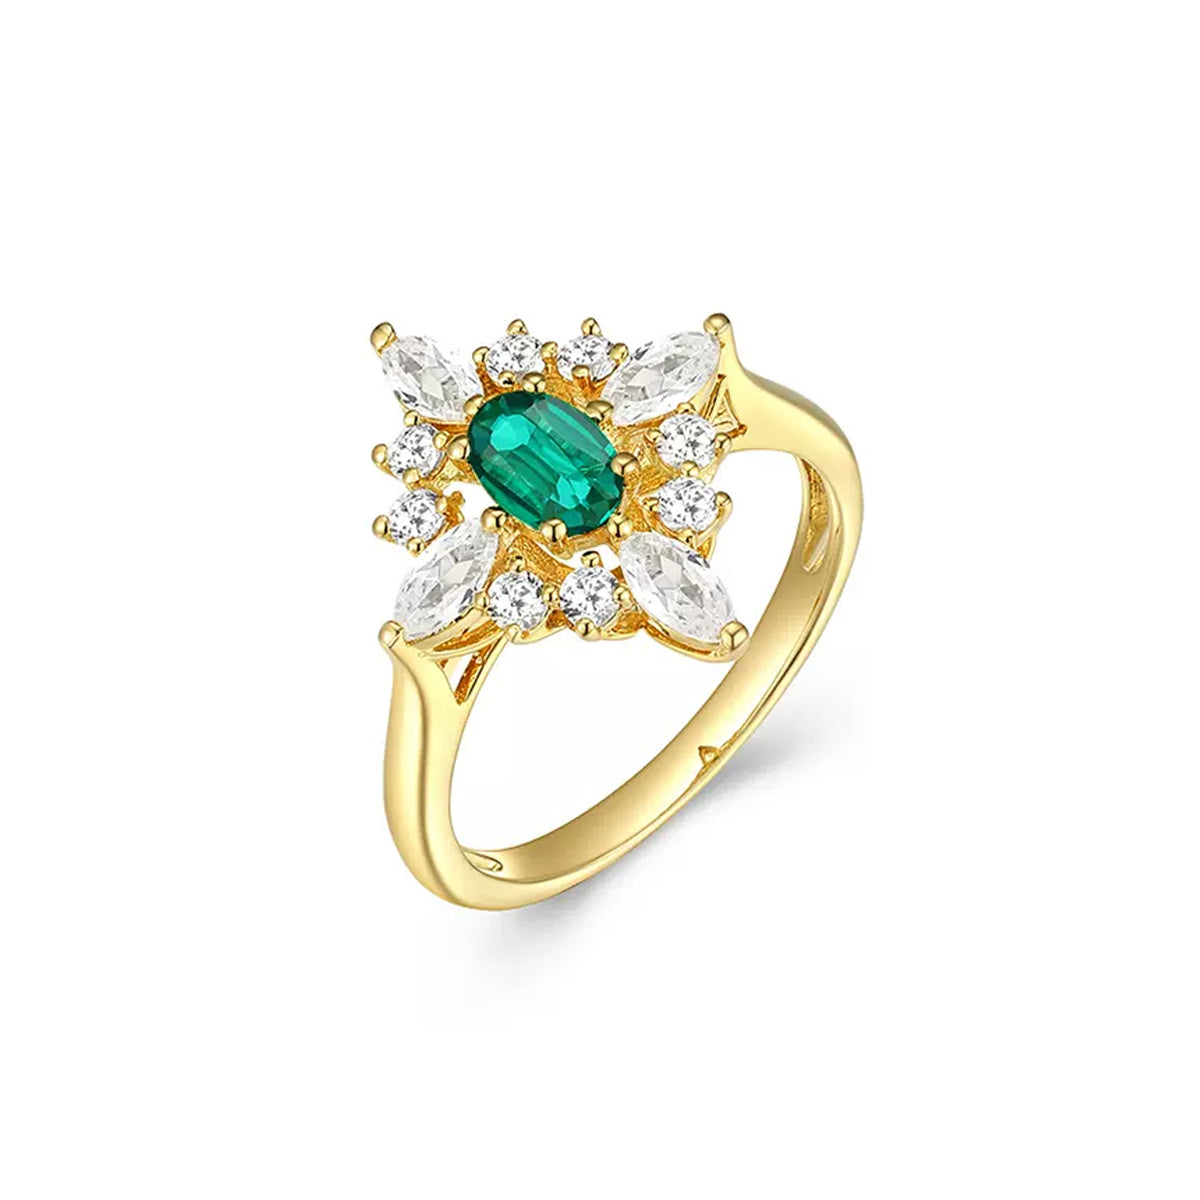 Siliice Jewelry - Emerald Series  Ring - Green Lab-grown Gemstones Ring For Women